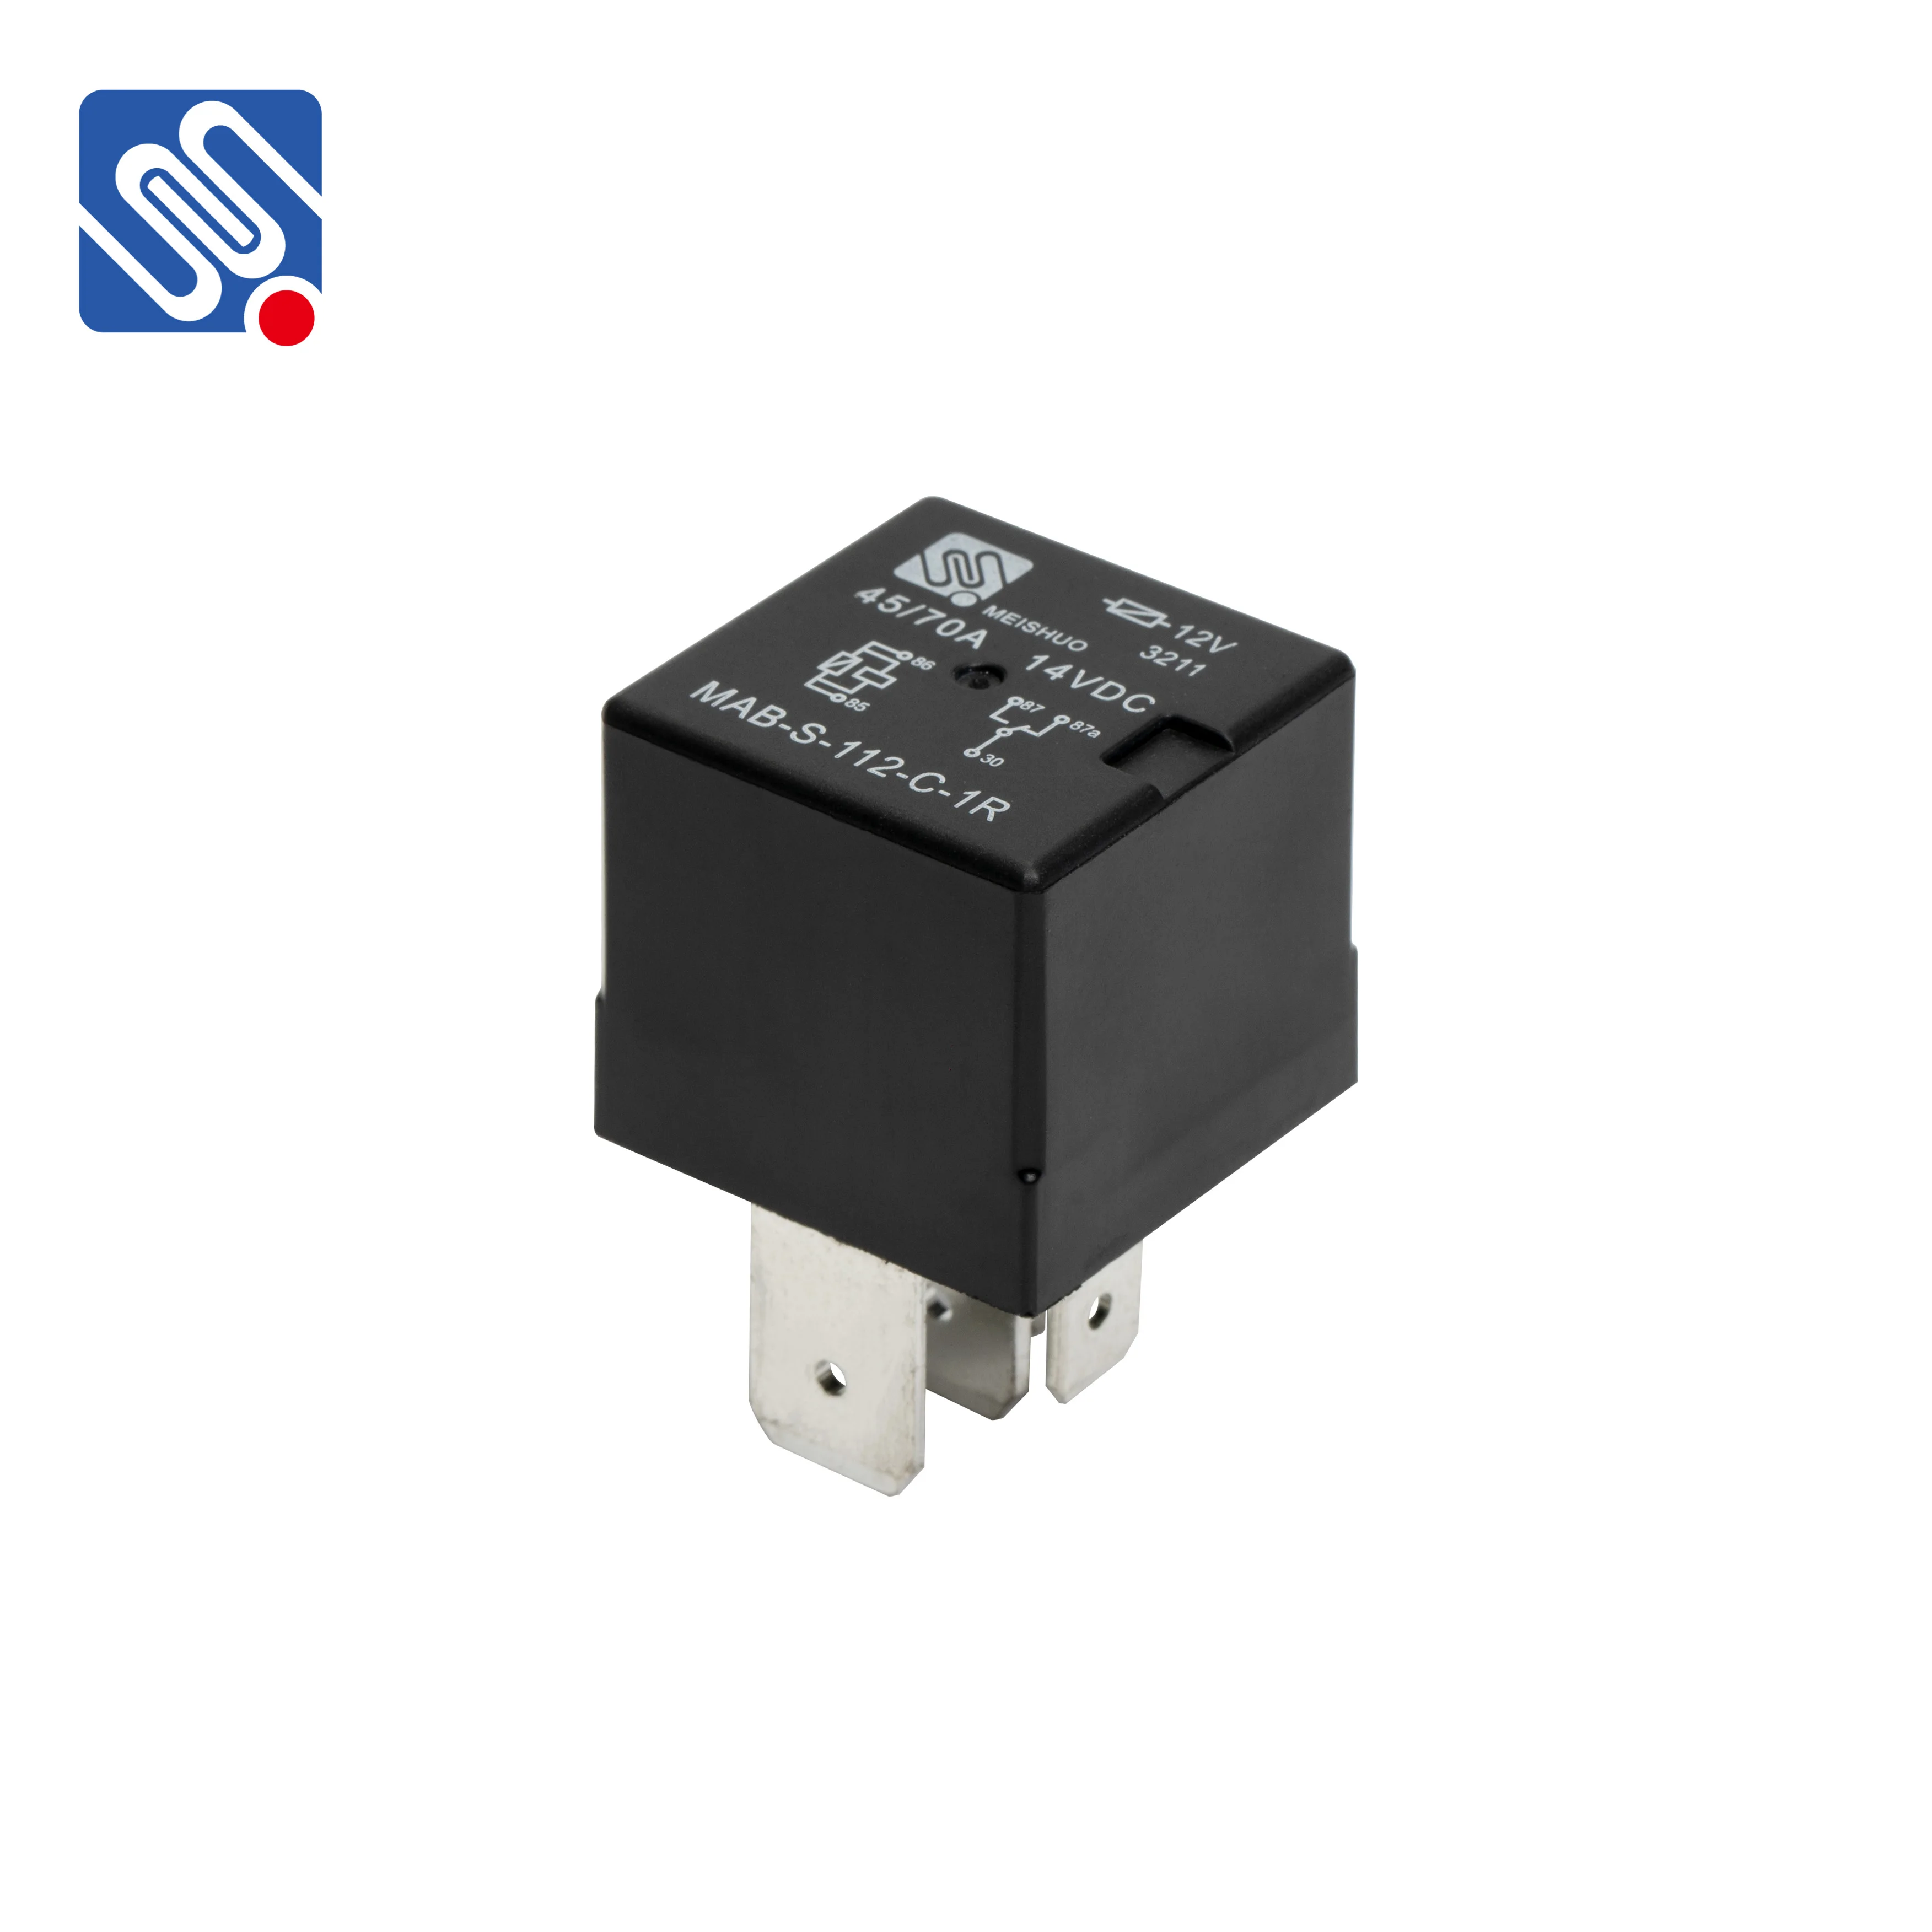 Meishuo MAB Automotive Relay 12V 24V 5 Pin 80A with Socket for Horn and Auto Lighting Controller